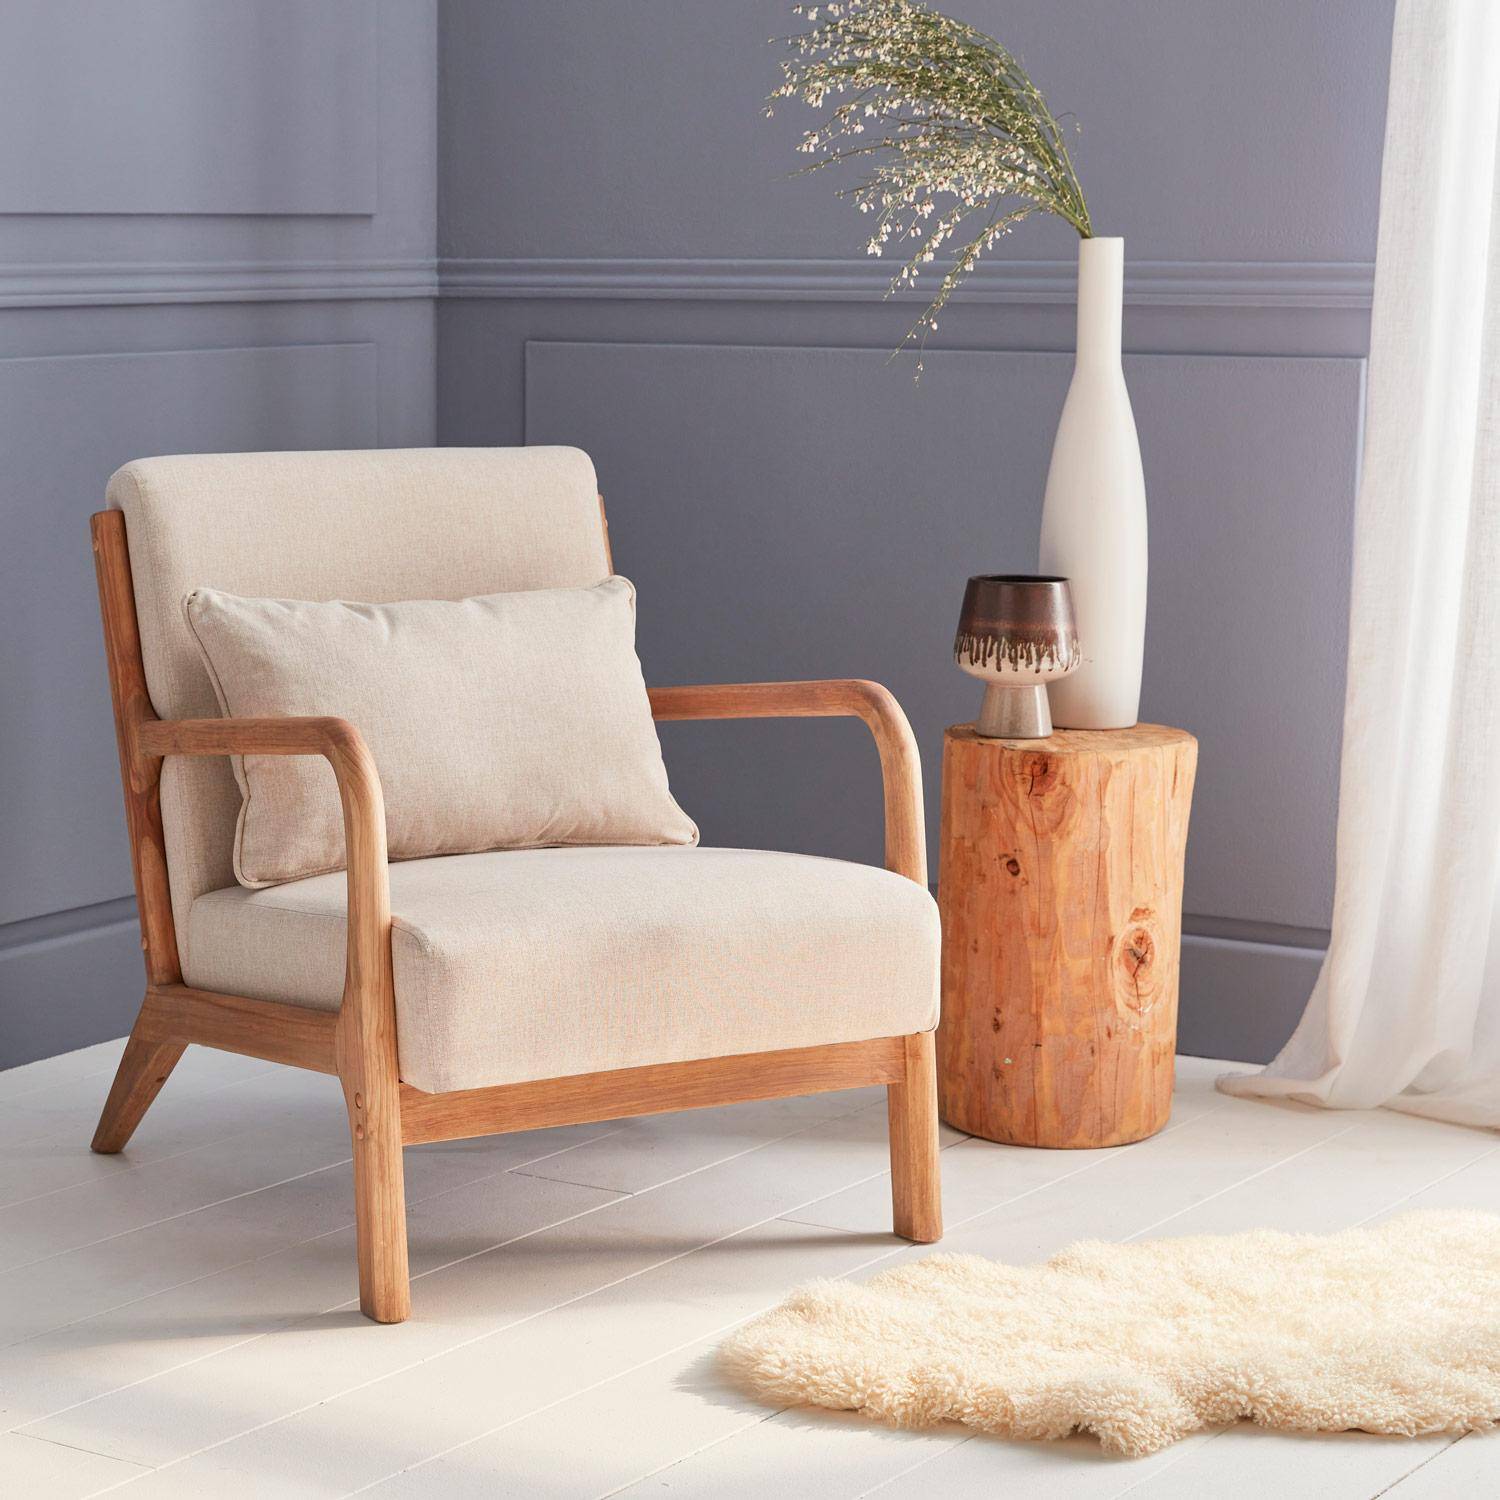 Wooden armchair with scandi-style compass legs and cushion - Lorens - Beige Photo1